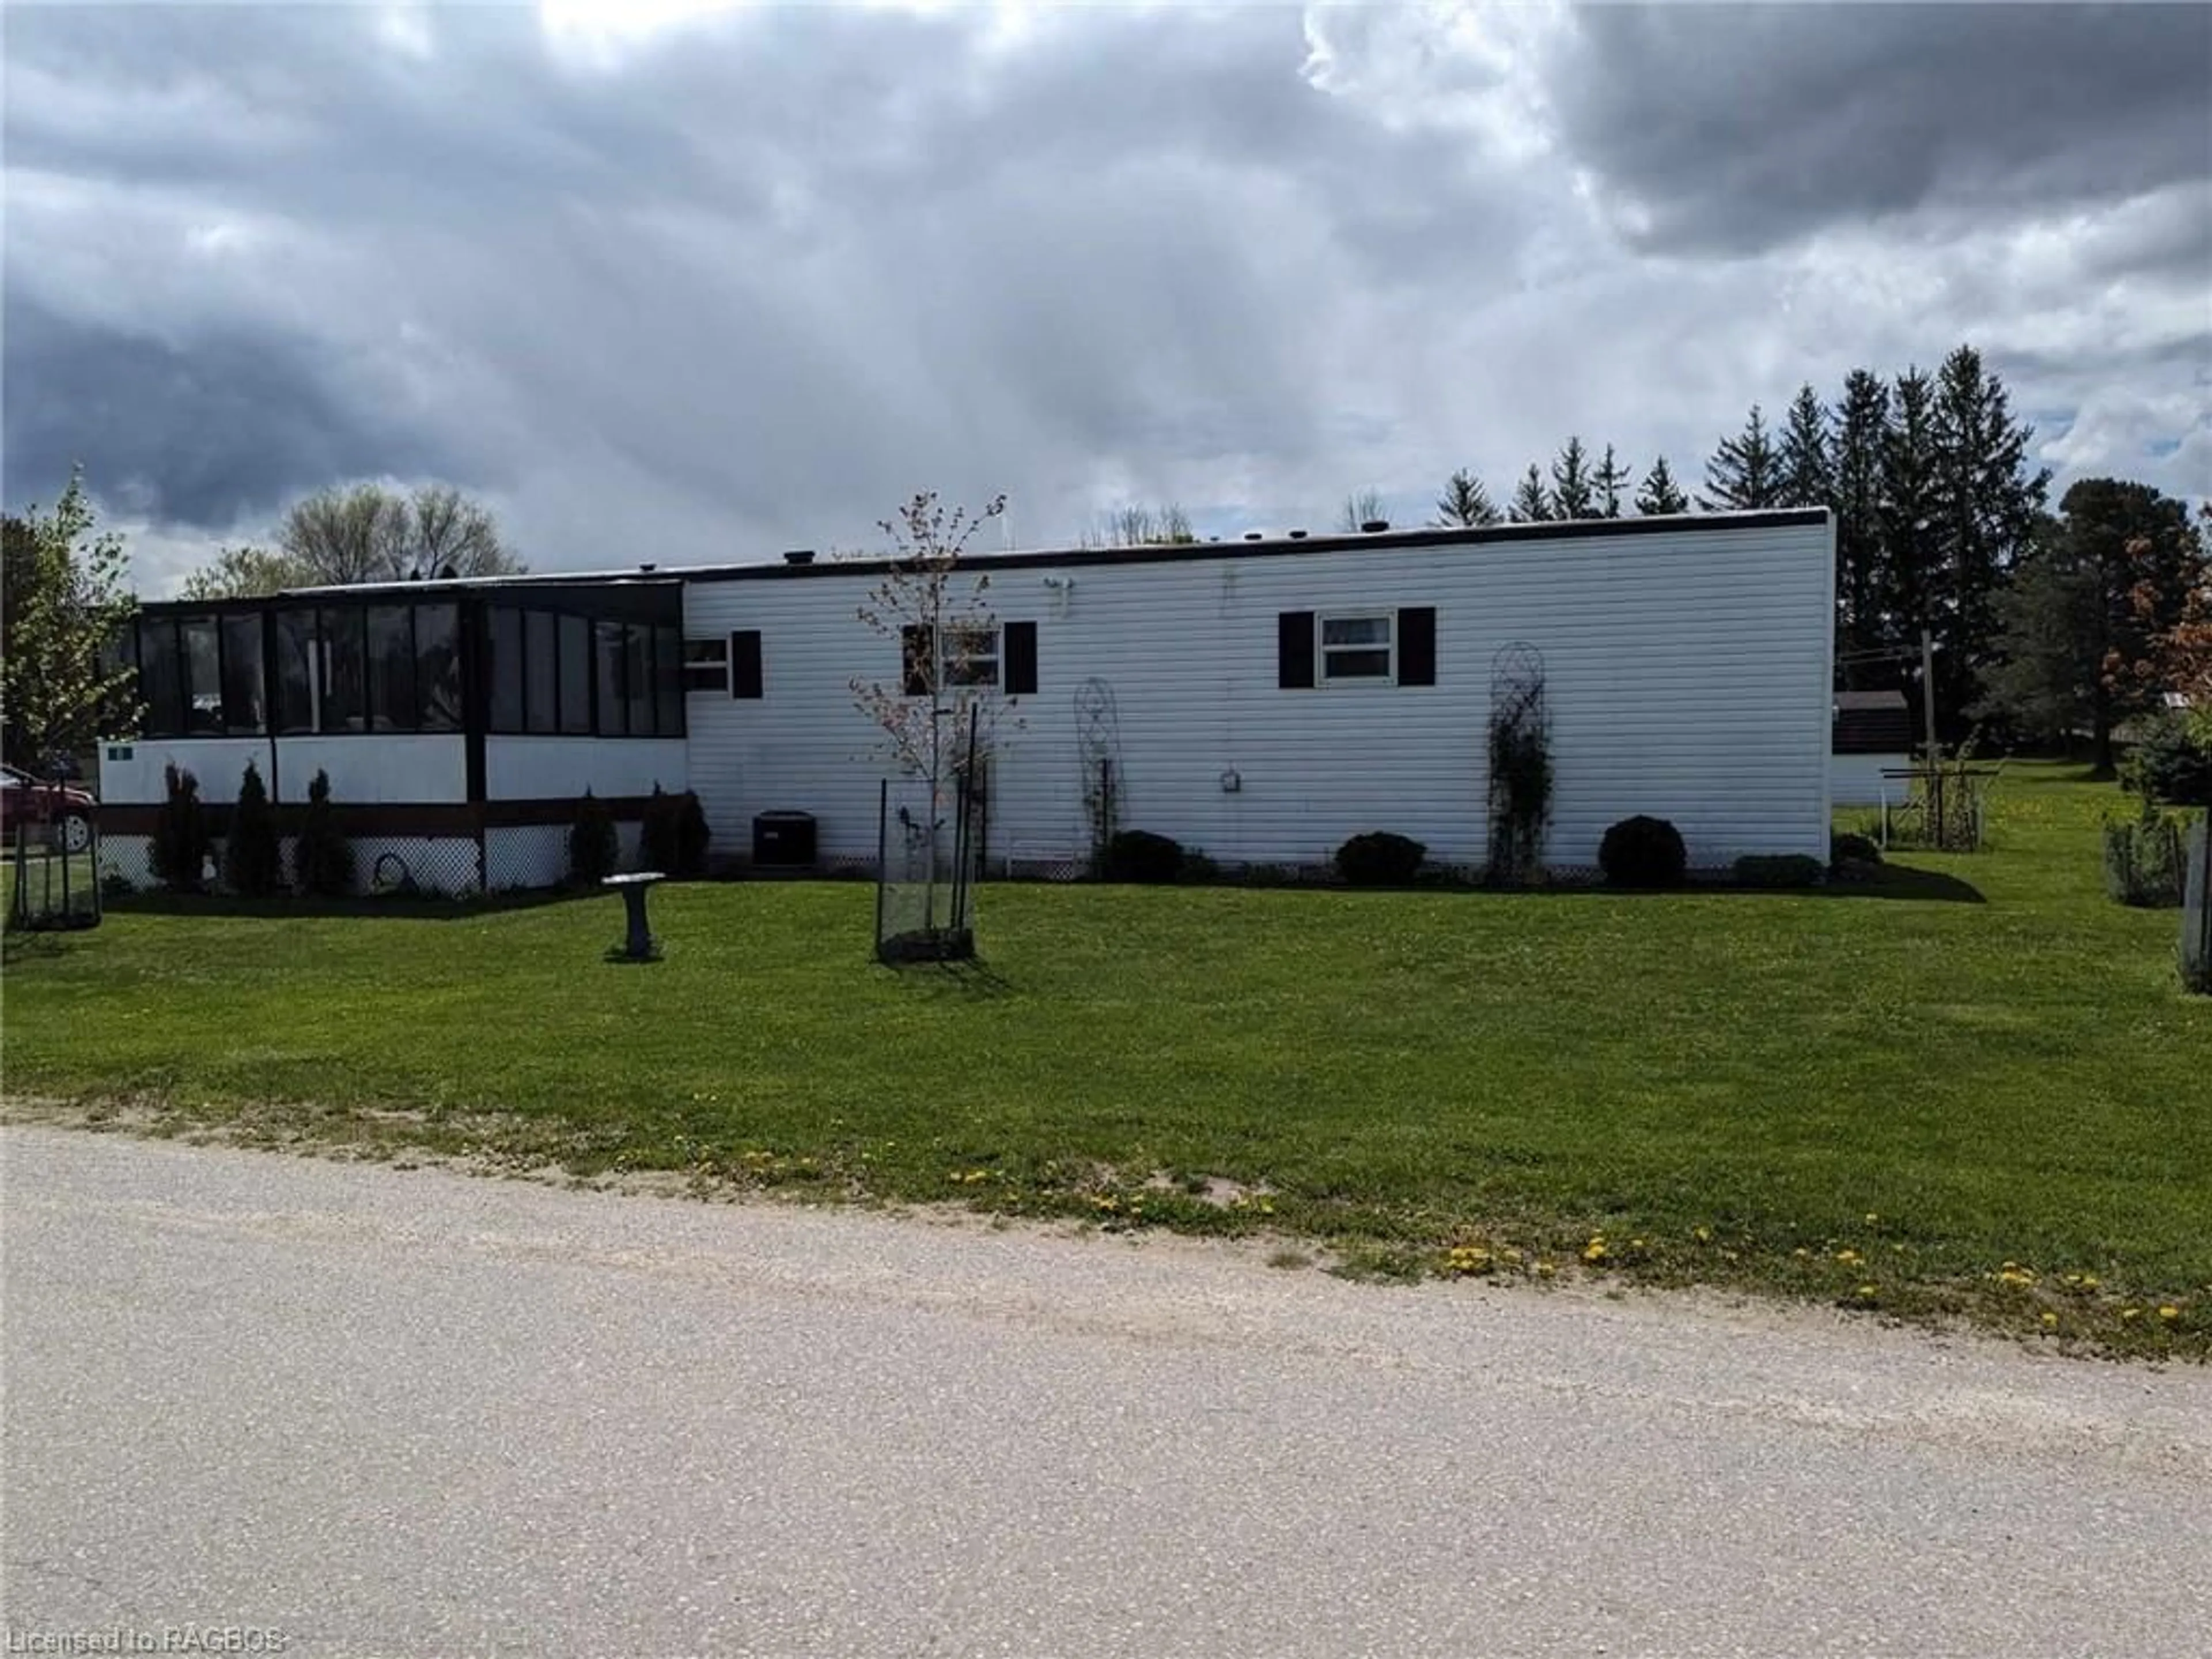 Frontside or backside of a home for 450 Tremaine Ave #8, Listowel Ontario N4W 3G9